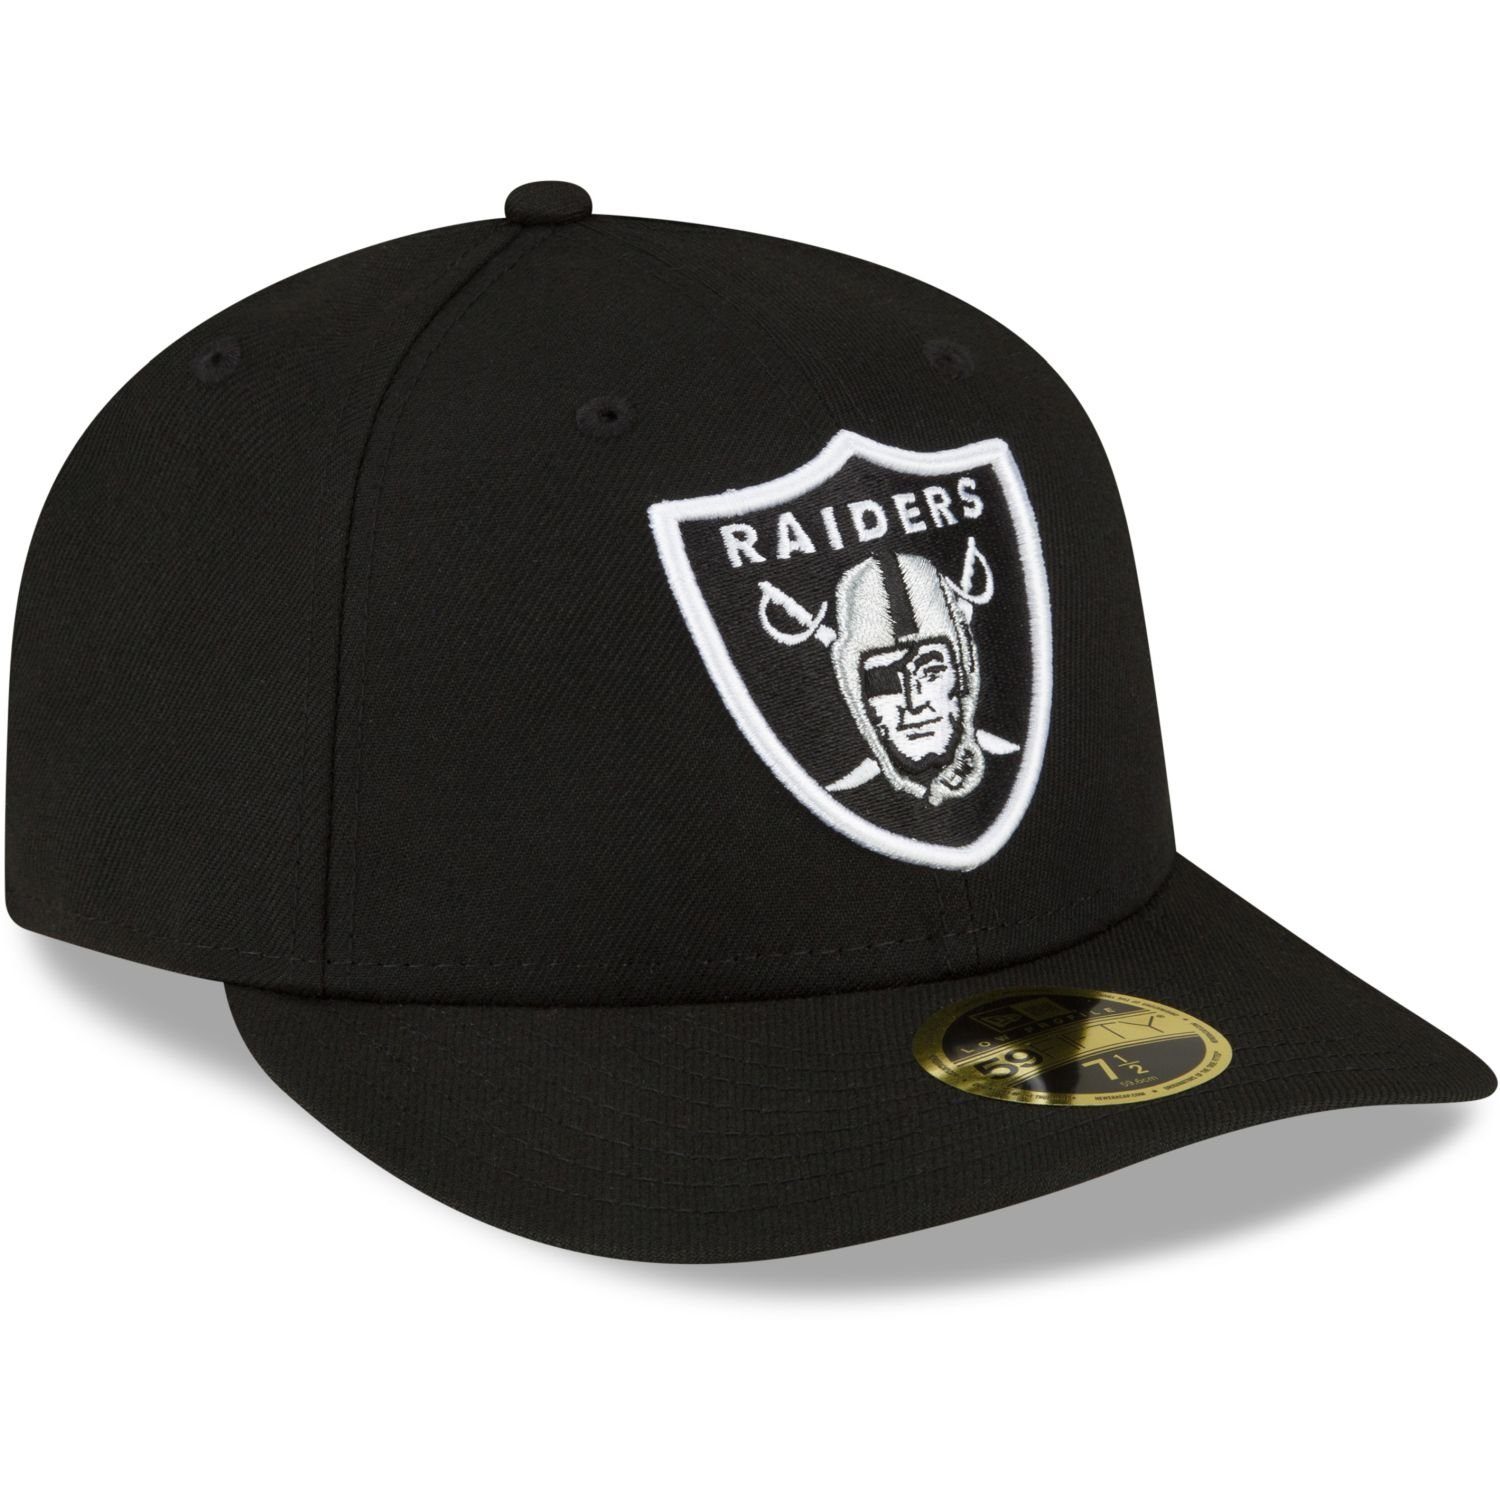 New Era Fitted Cap 59Fifty LOW NFL Vegas Las Raiders PROFILE